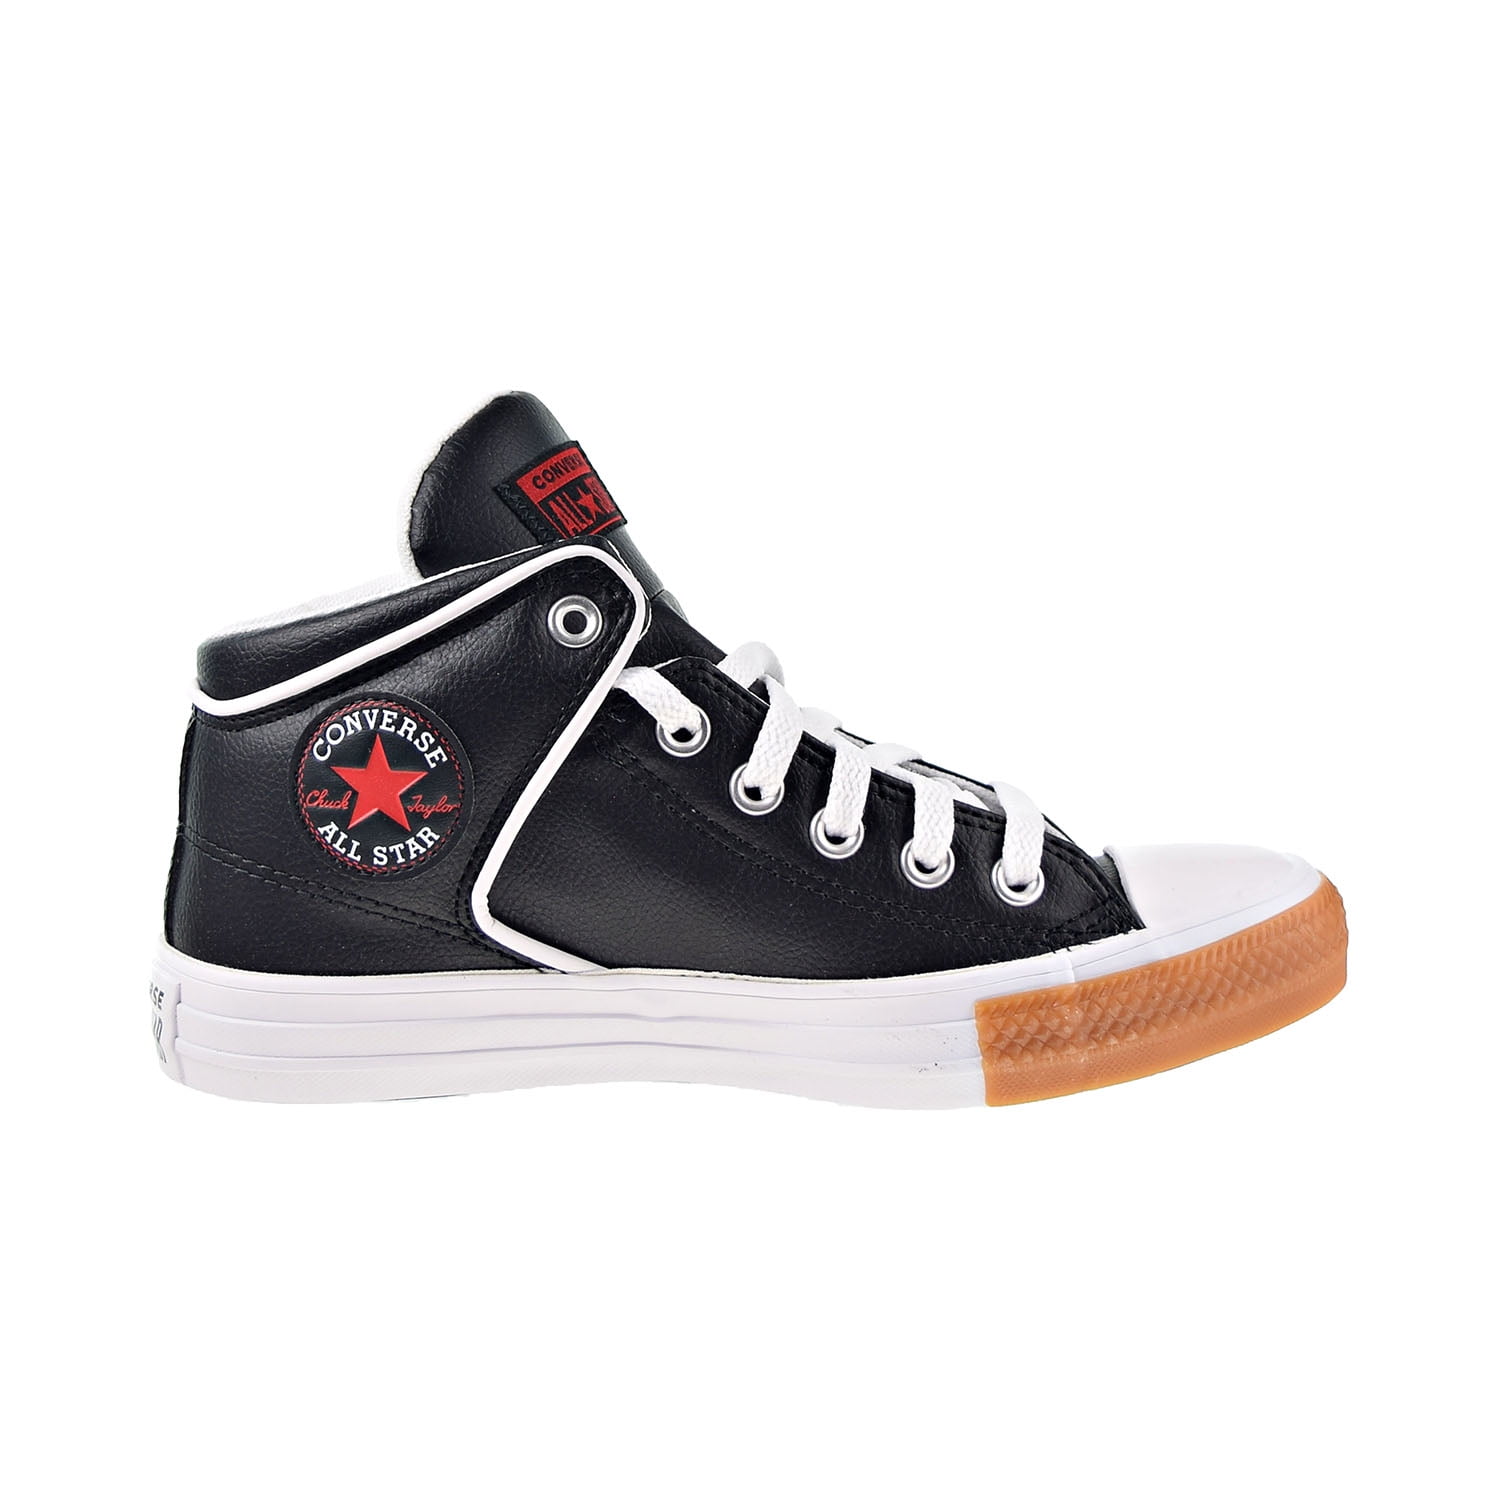 converse chuck taylor all star high street synthetic leather